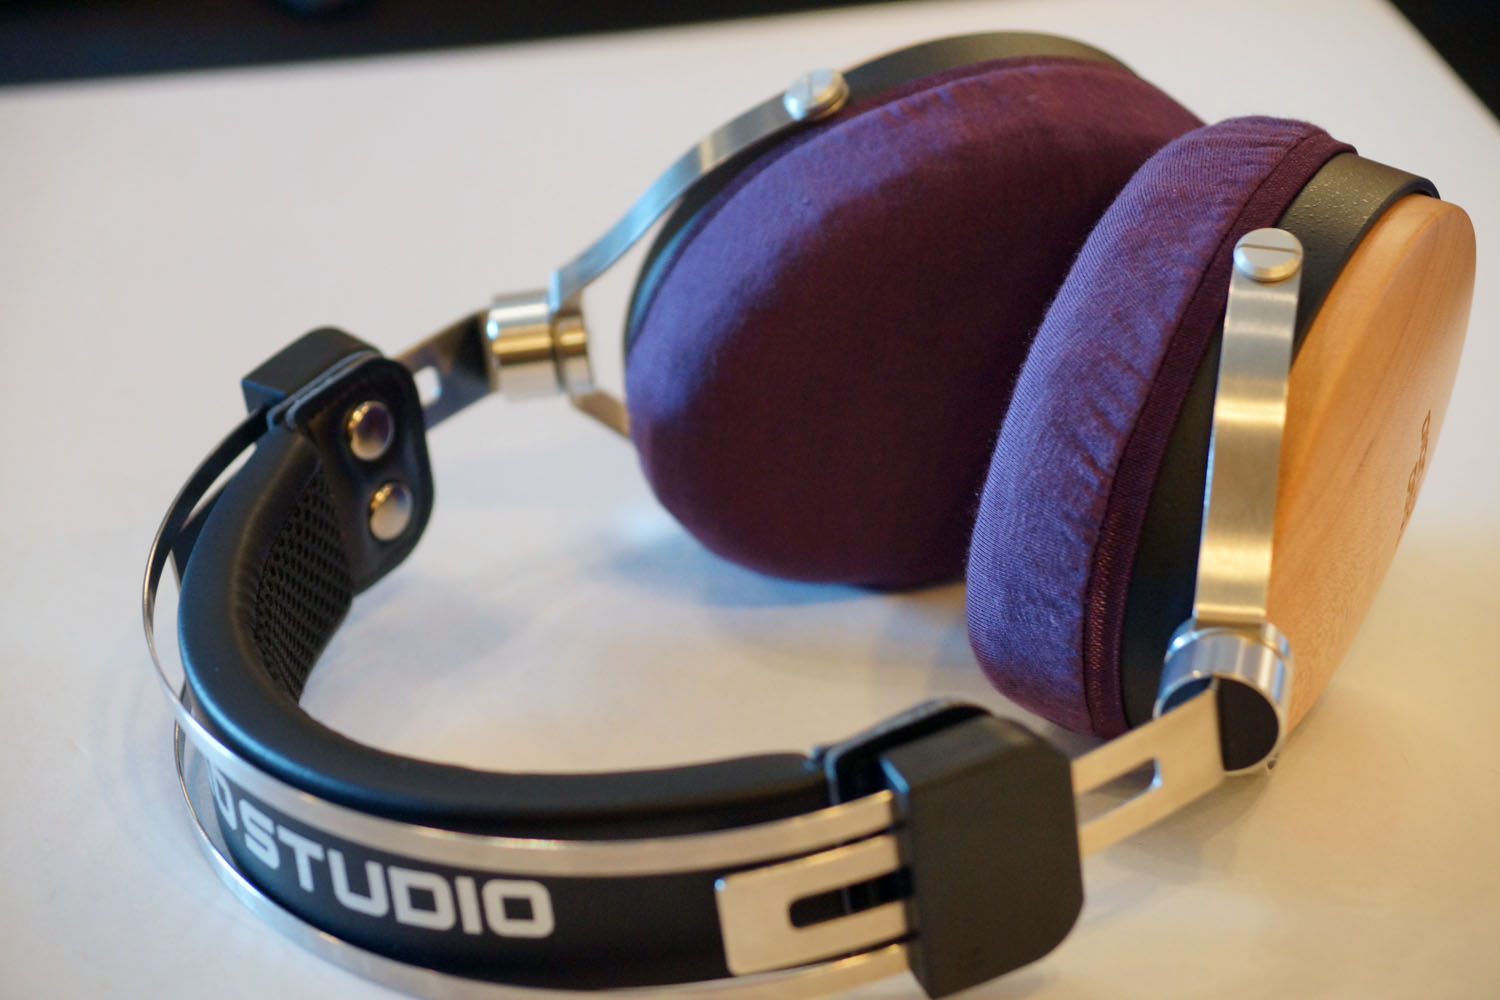 TAGO STUDIO T3-01 earpad repair and protection: Super Stretch 